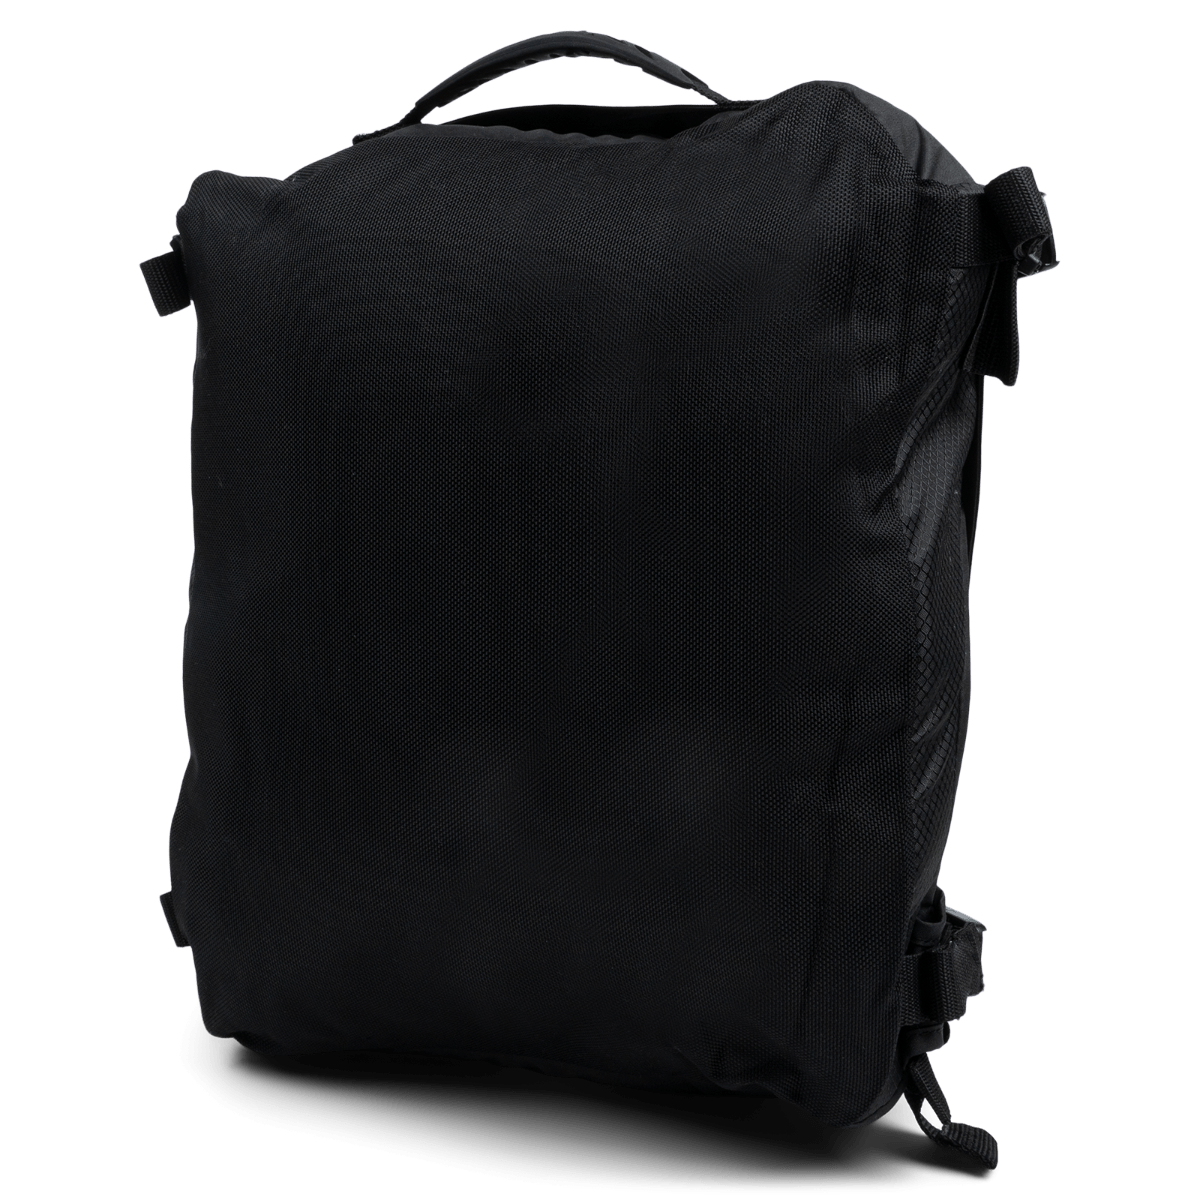 Slim Tunnel Bag with soft straps - 15 L